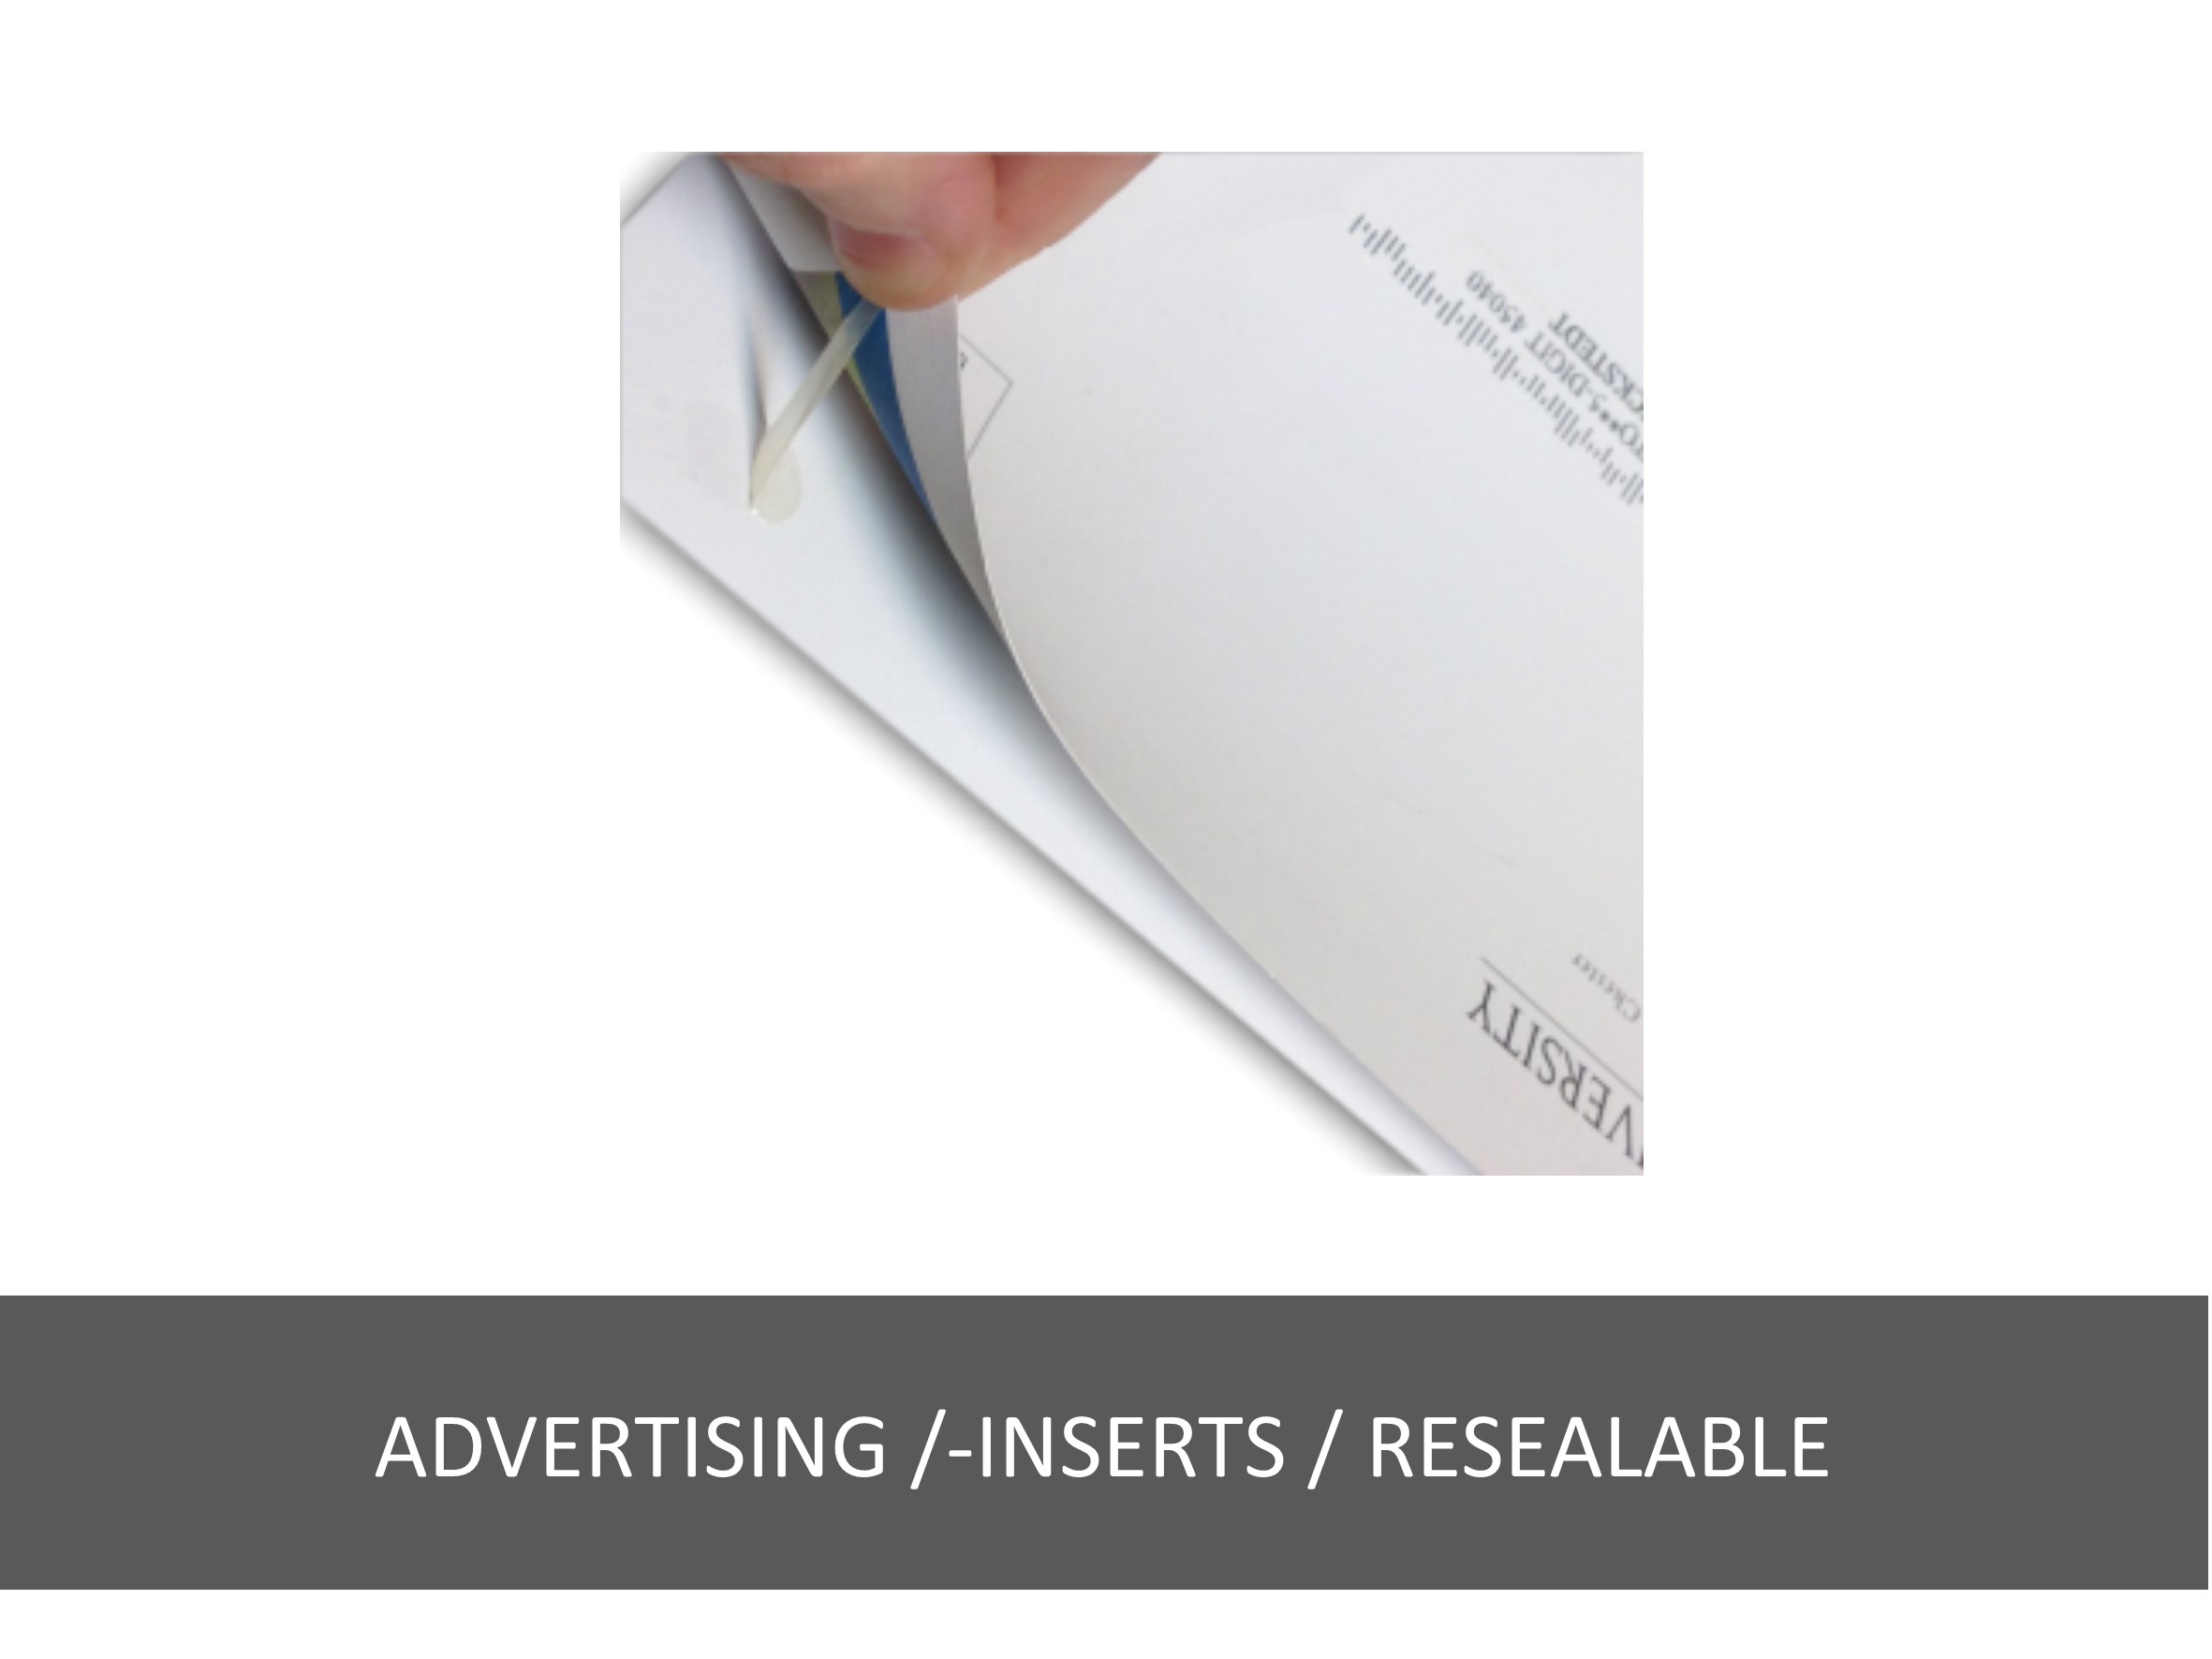 Advertising /-inserts / resealable